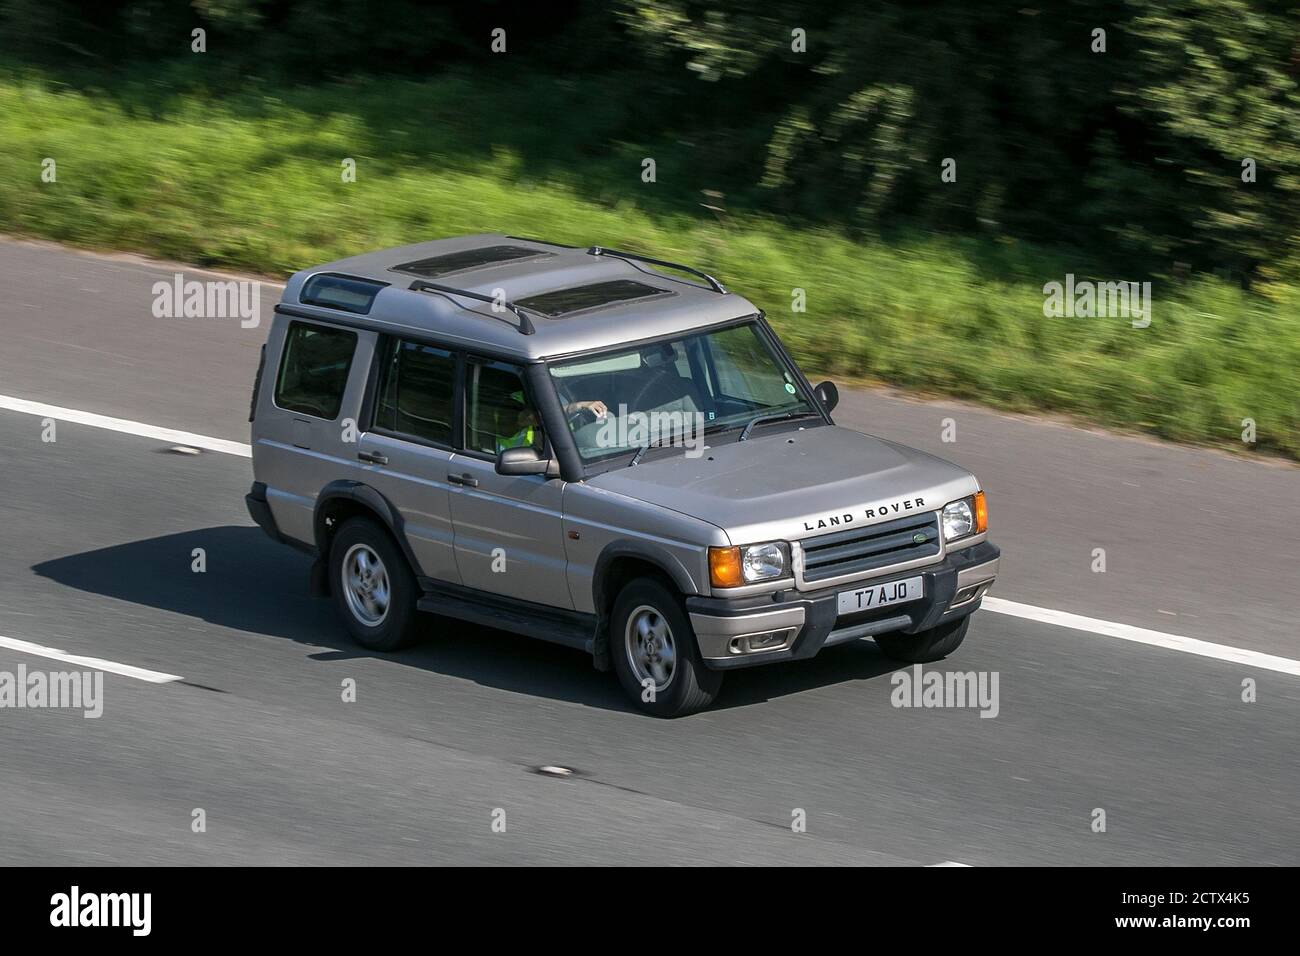 T7AJO 2000 Land Rover Discovery Td5 Gs Silver Hardtop driving on the M6 motorway near Preston in Lancashire, UK. Stock Photo